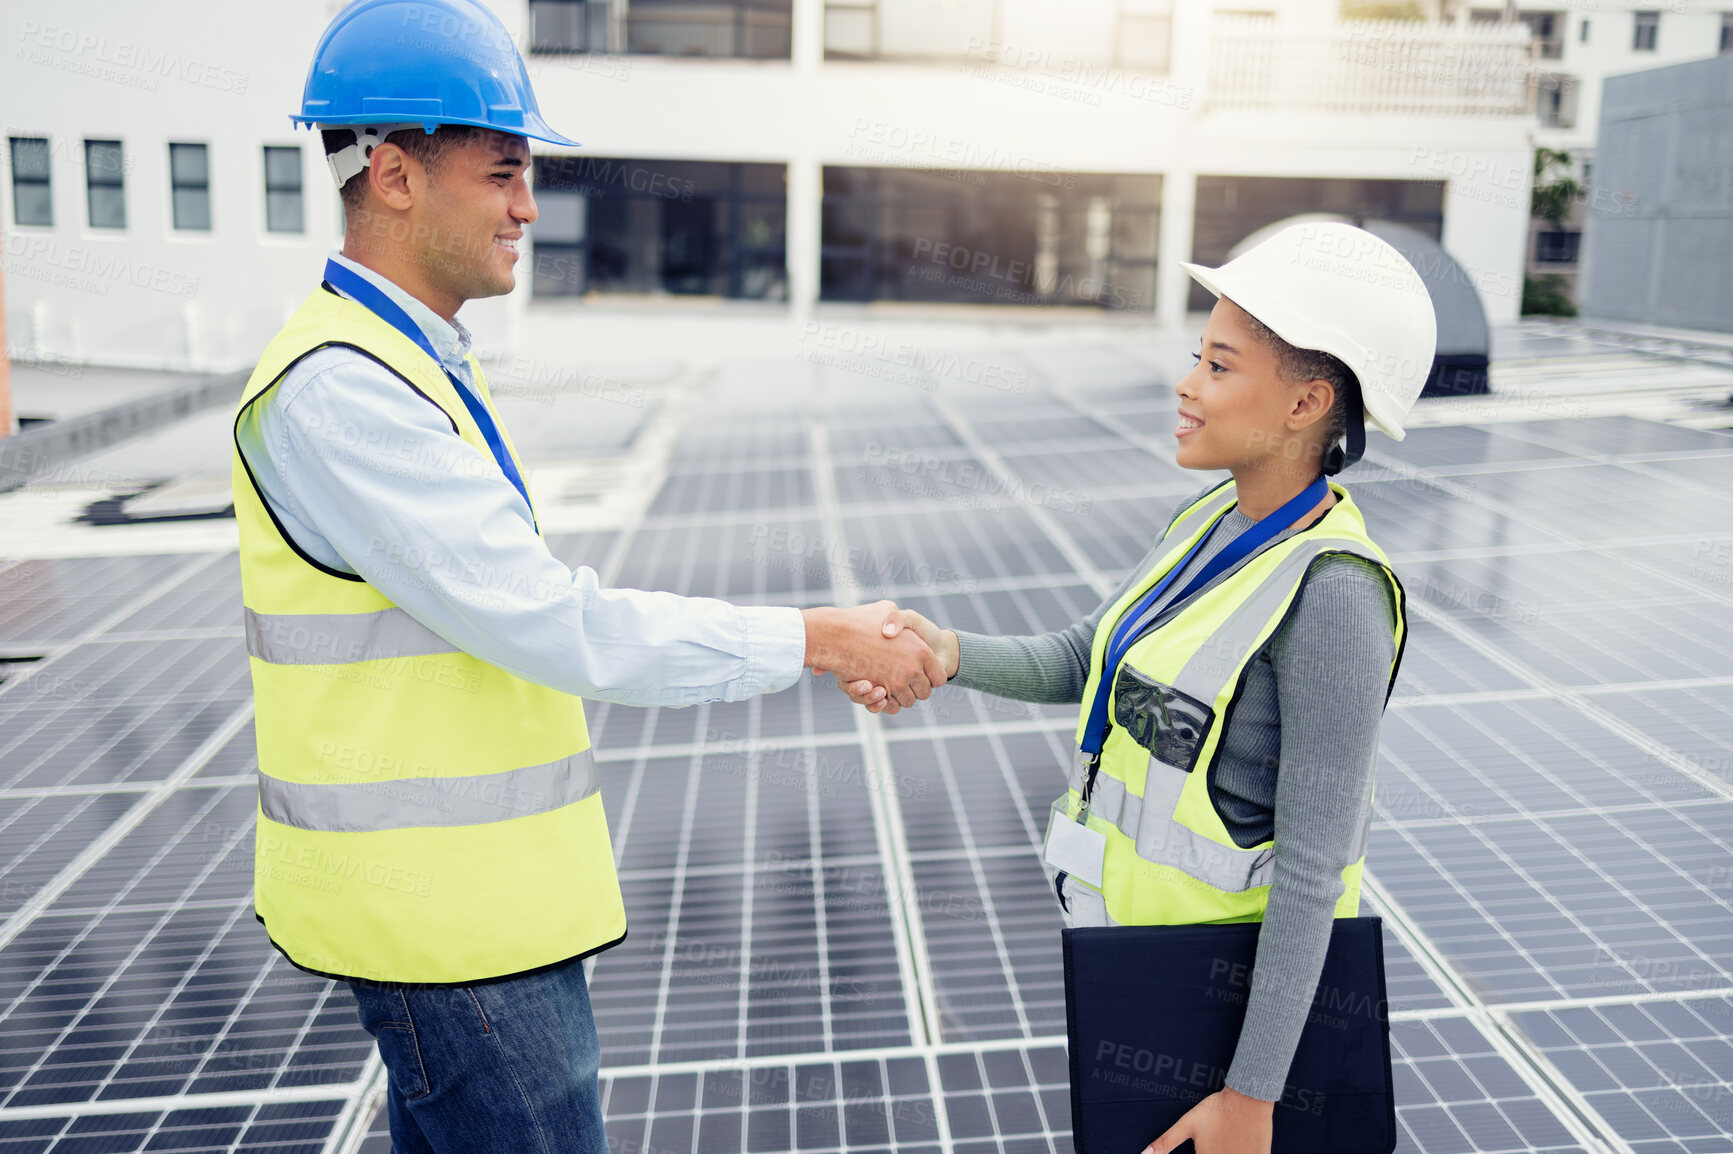 Buy stock photo Solar energy, solar panel worker and renewable energy handshake electricity deal of sustainability, power plant development and innovation. Clean energy, sustainable technology and green construction